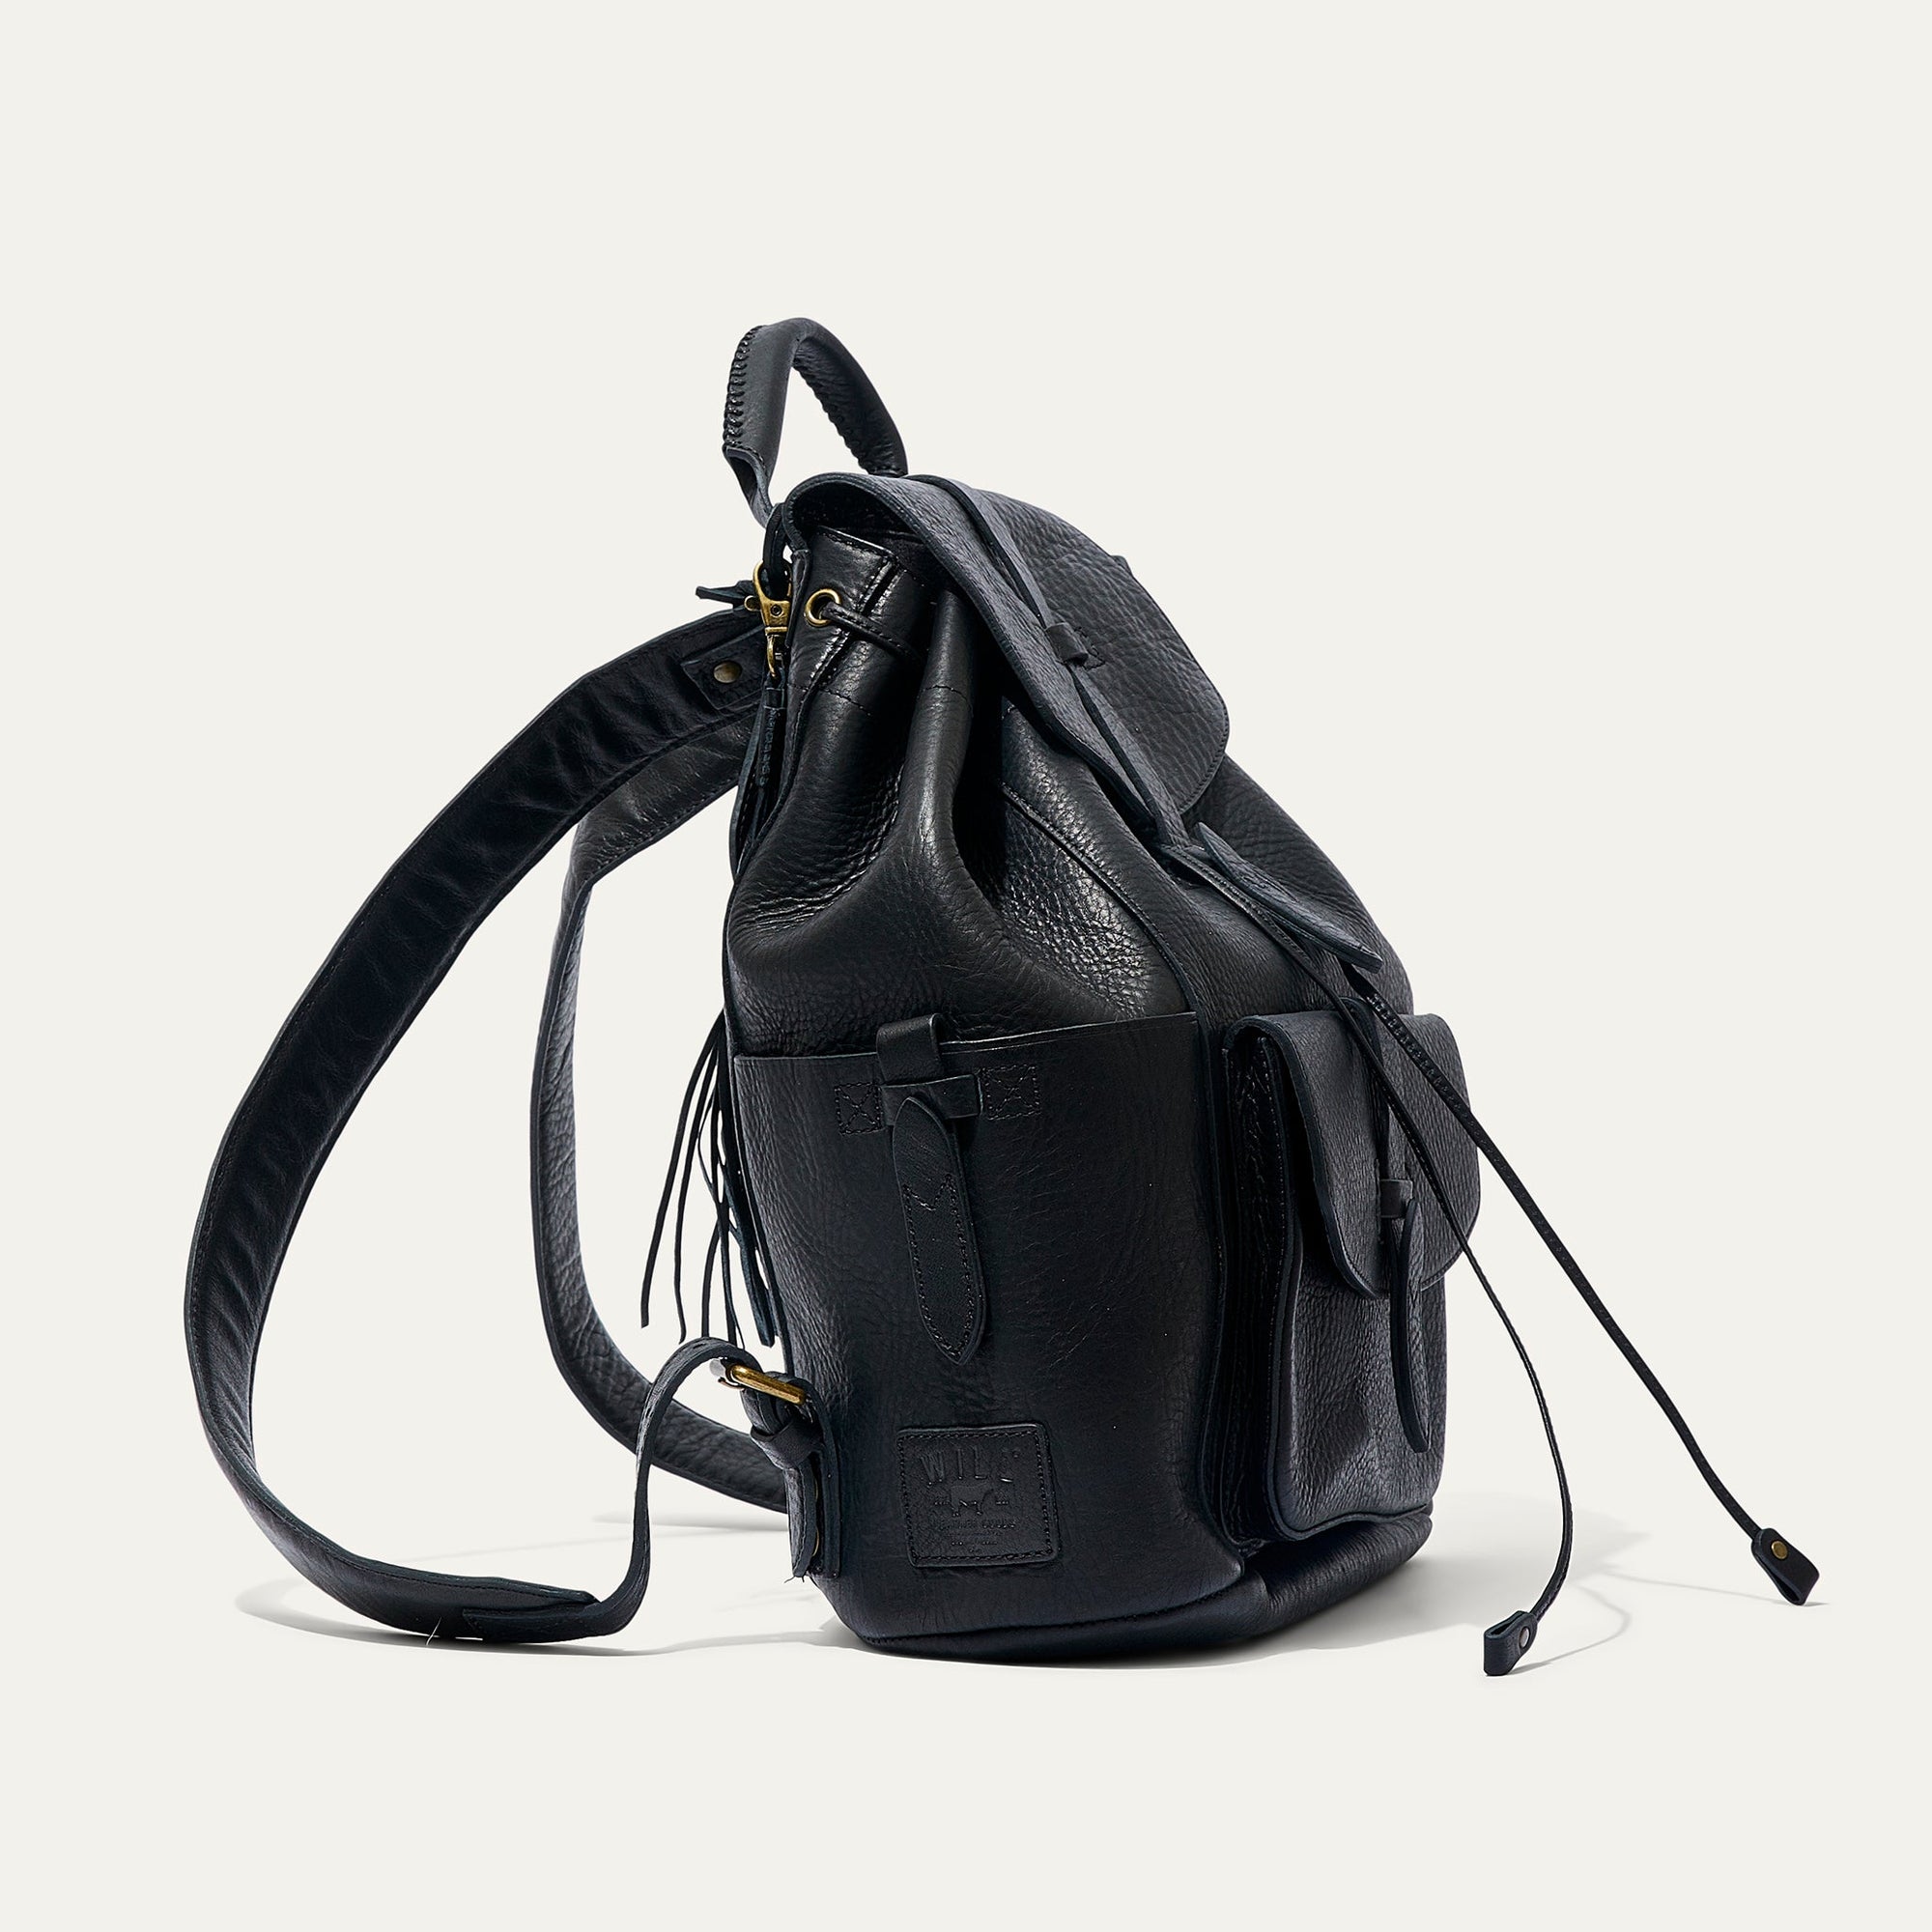 Rainier Leather Backpack in Black by Will Leather Goods